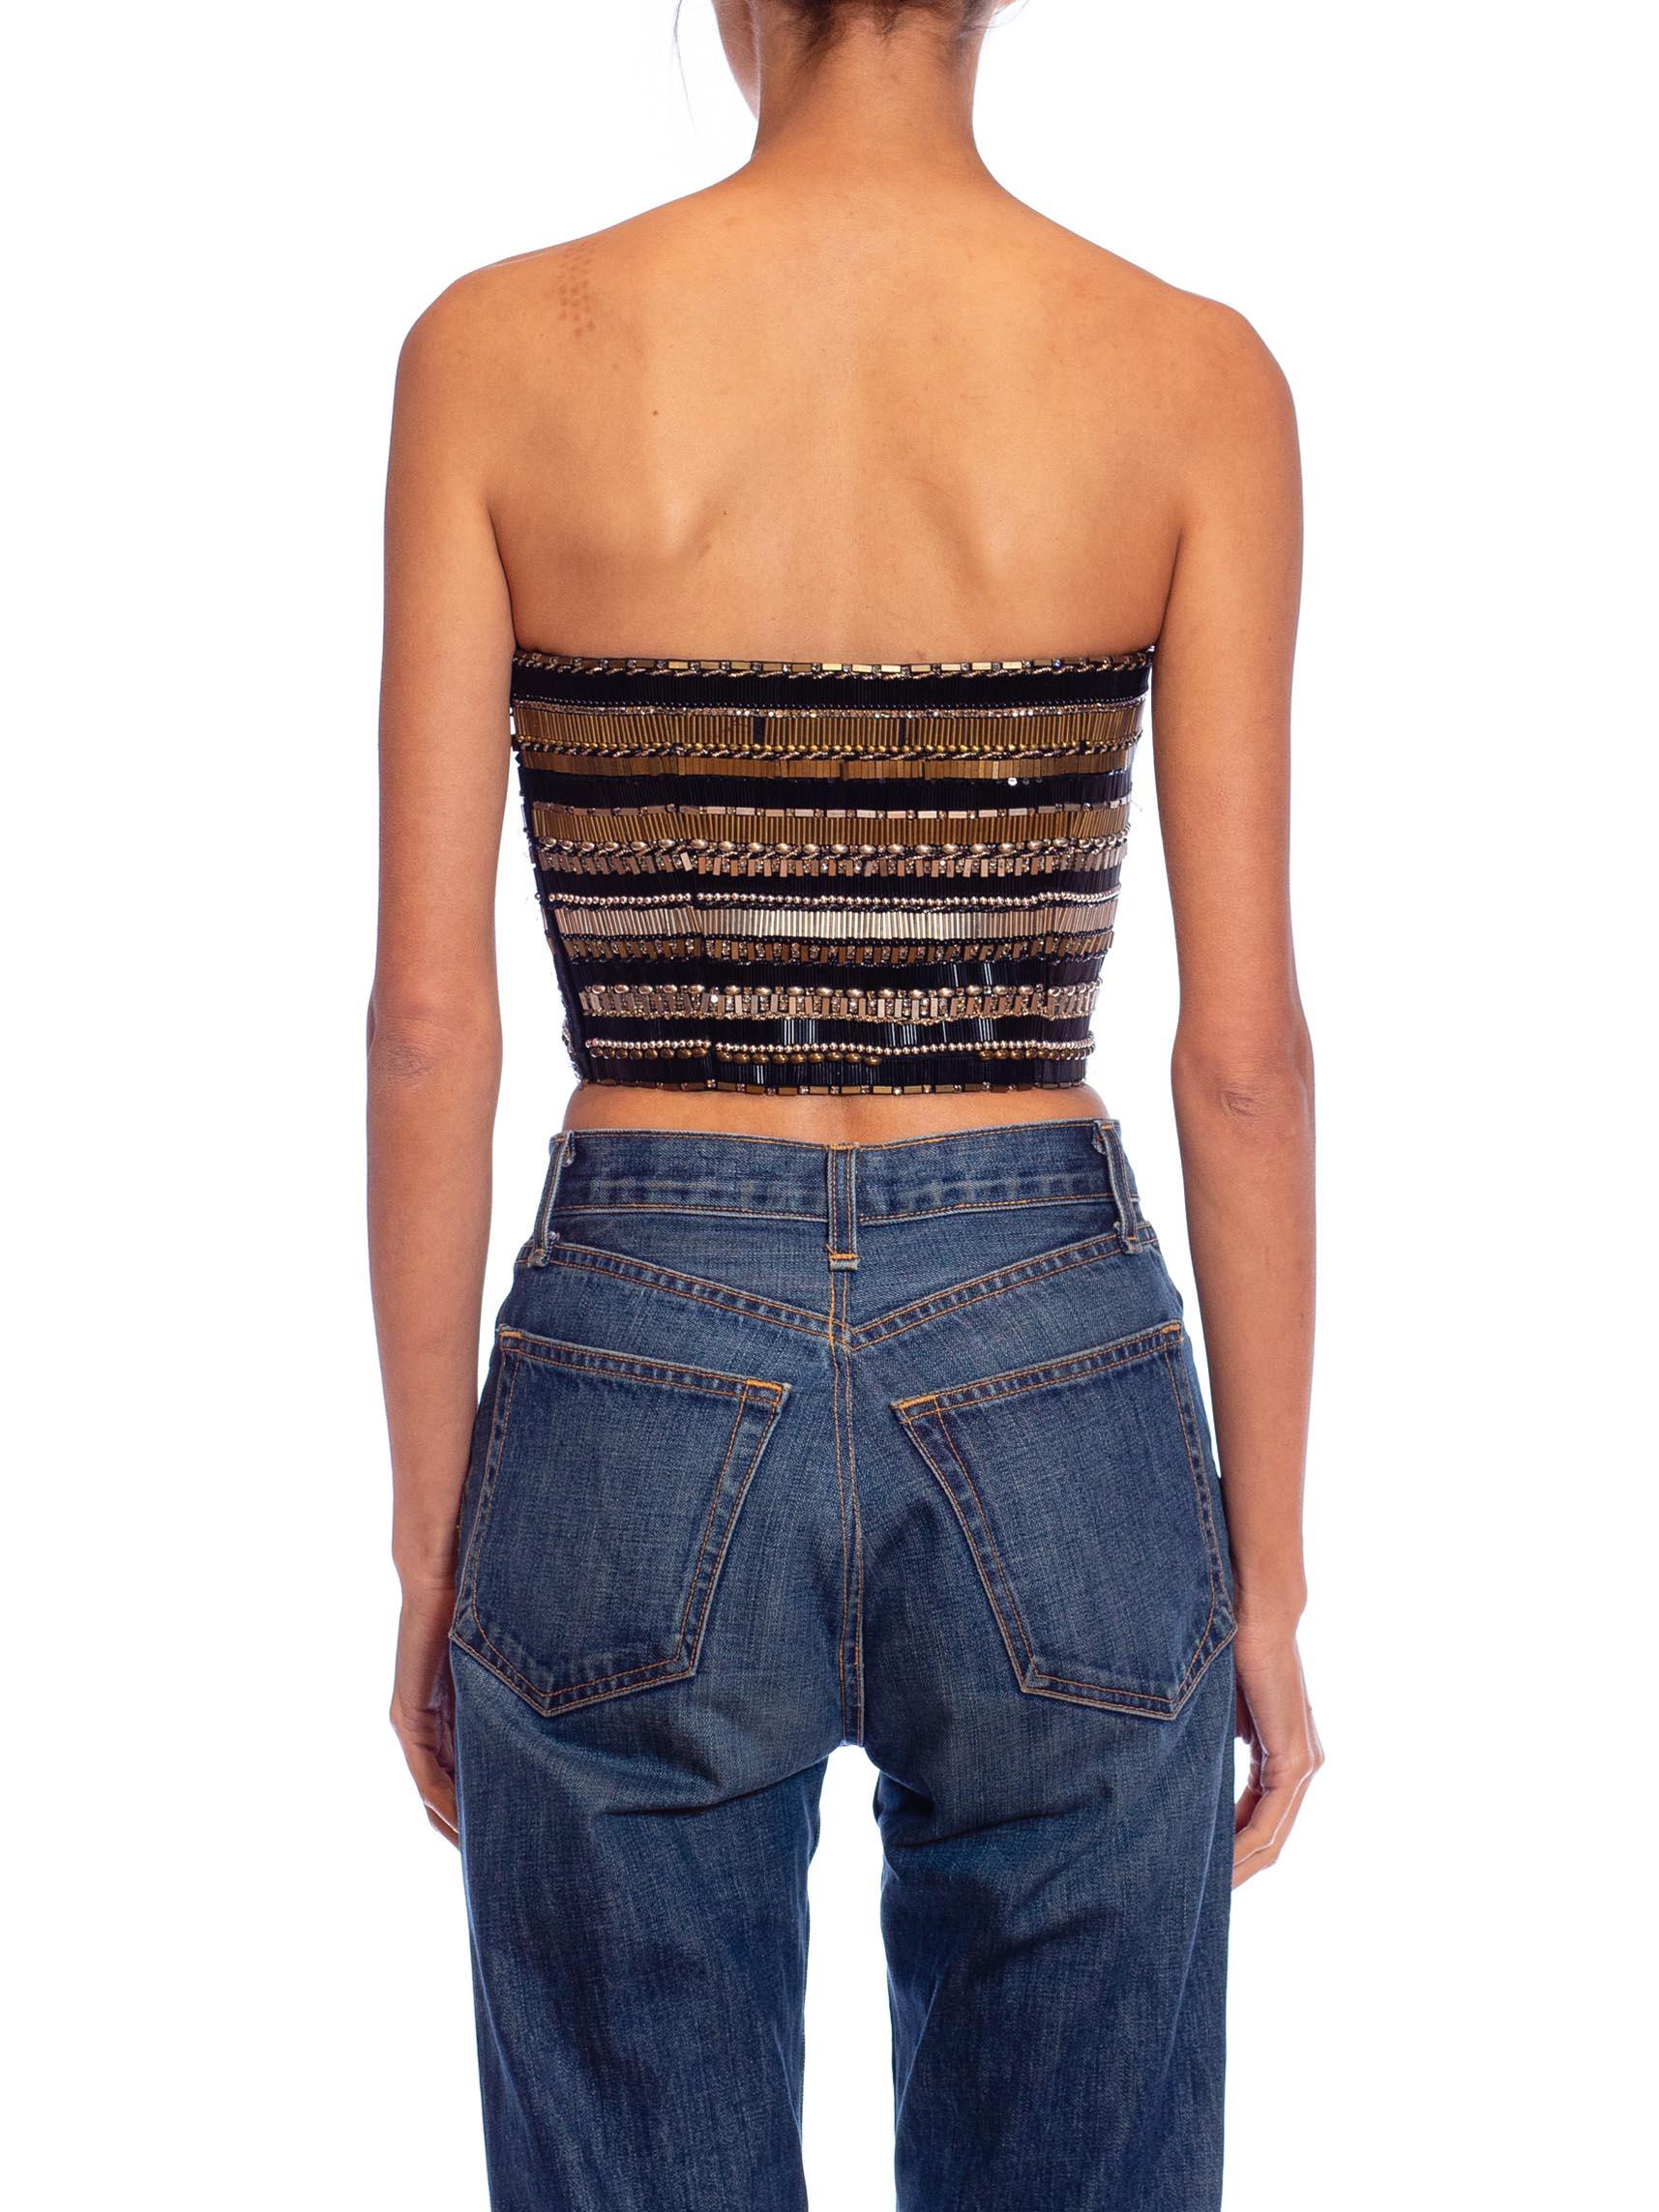 1990S GIANNI VERSACE Black, Silver & Gold Beaded Silk Strapless Bustier For Sale 5